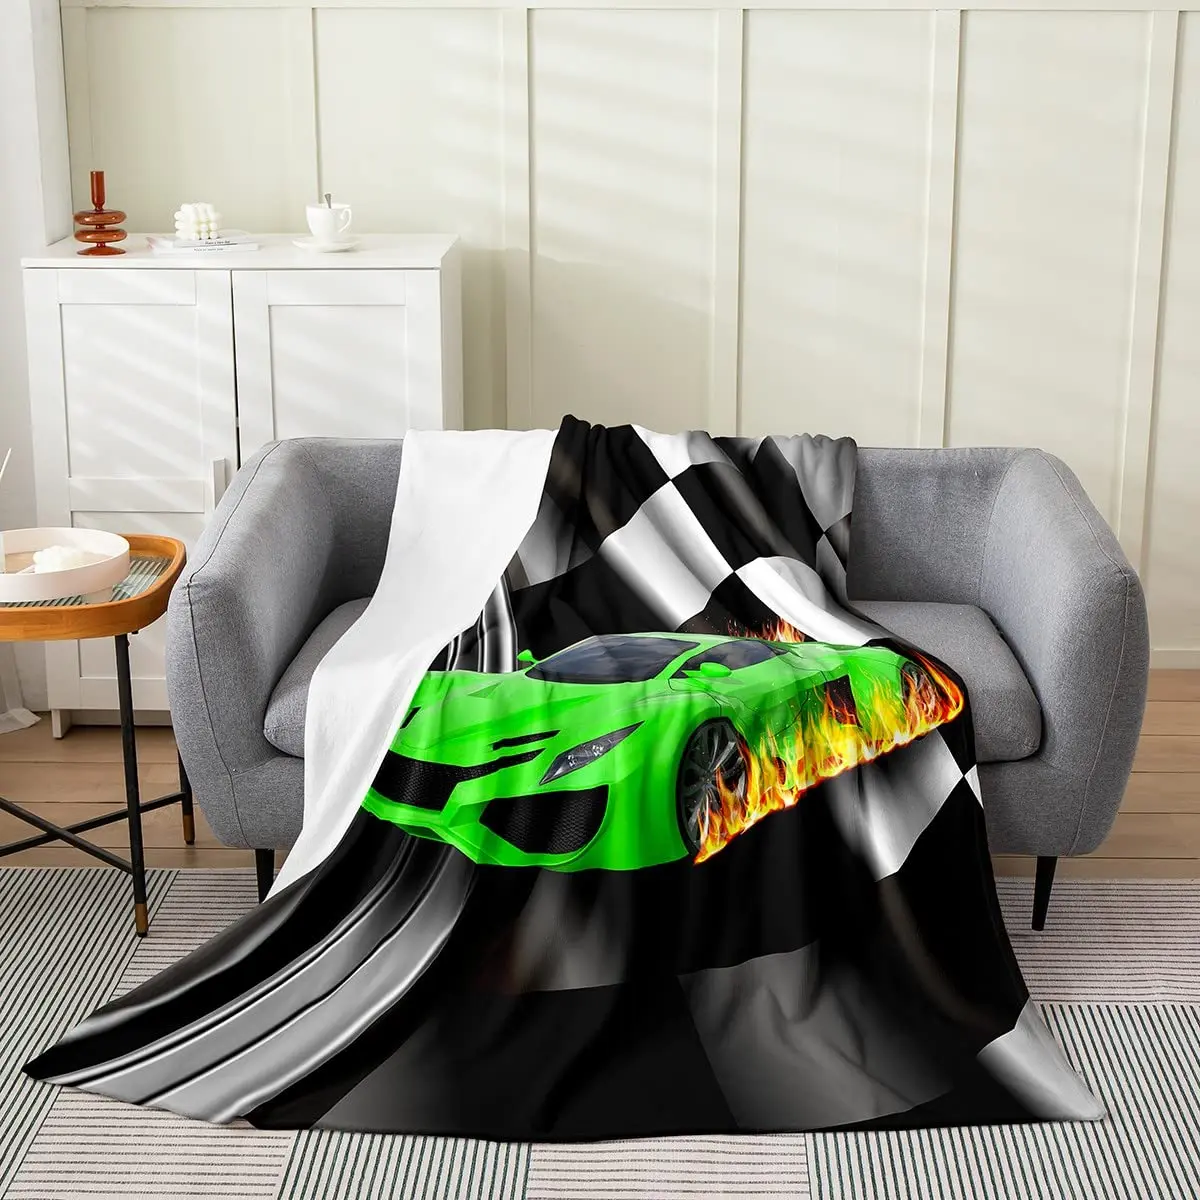 

Cars Theme Throw Blanket Race Car Super Soft Lightweight for Bed Sofa Couch Blanket King Queen Full Size for Car Enthusiast Gift